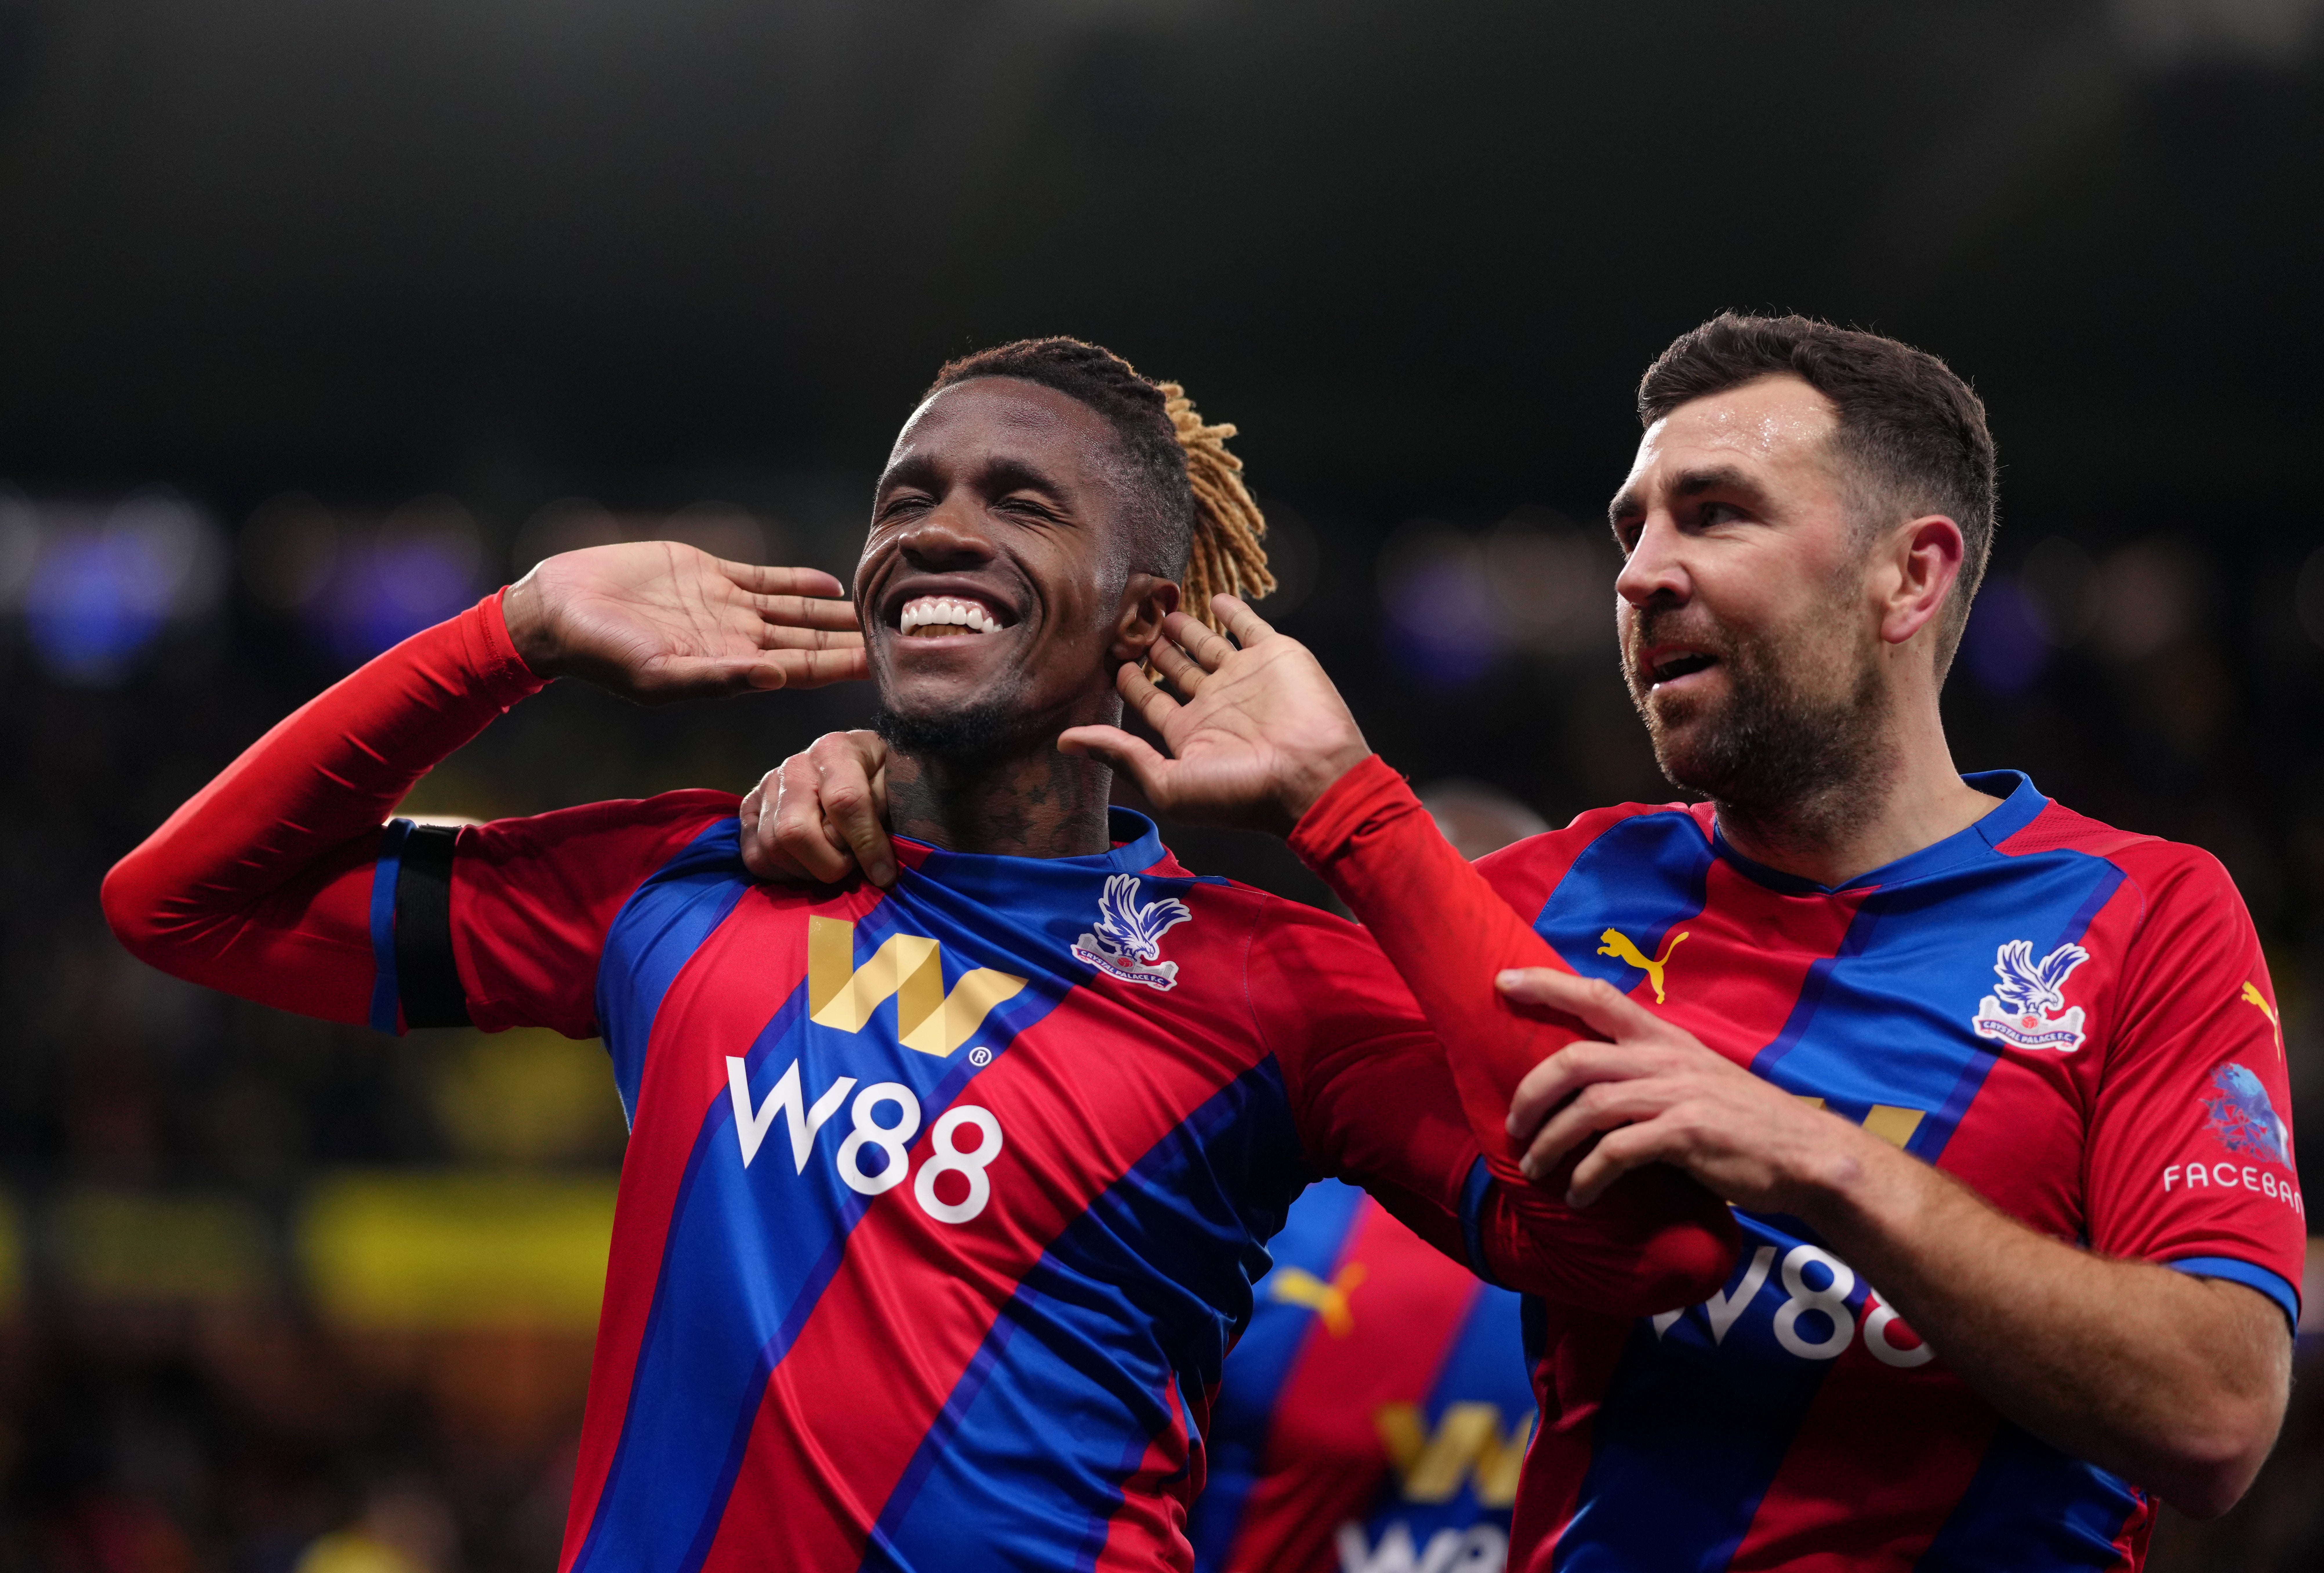 Wilfried Zaha starred as the Eagles soared past the Hornets